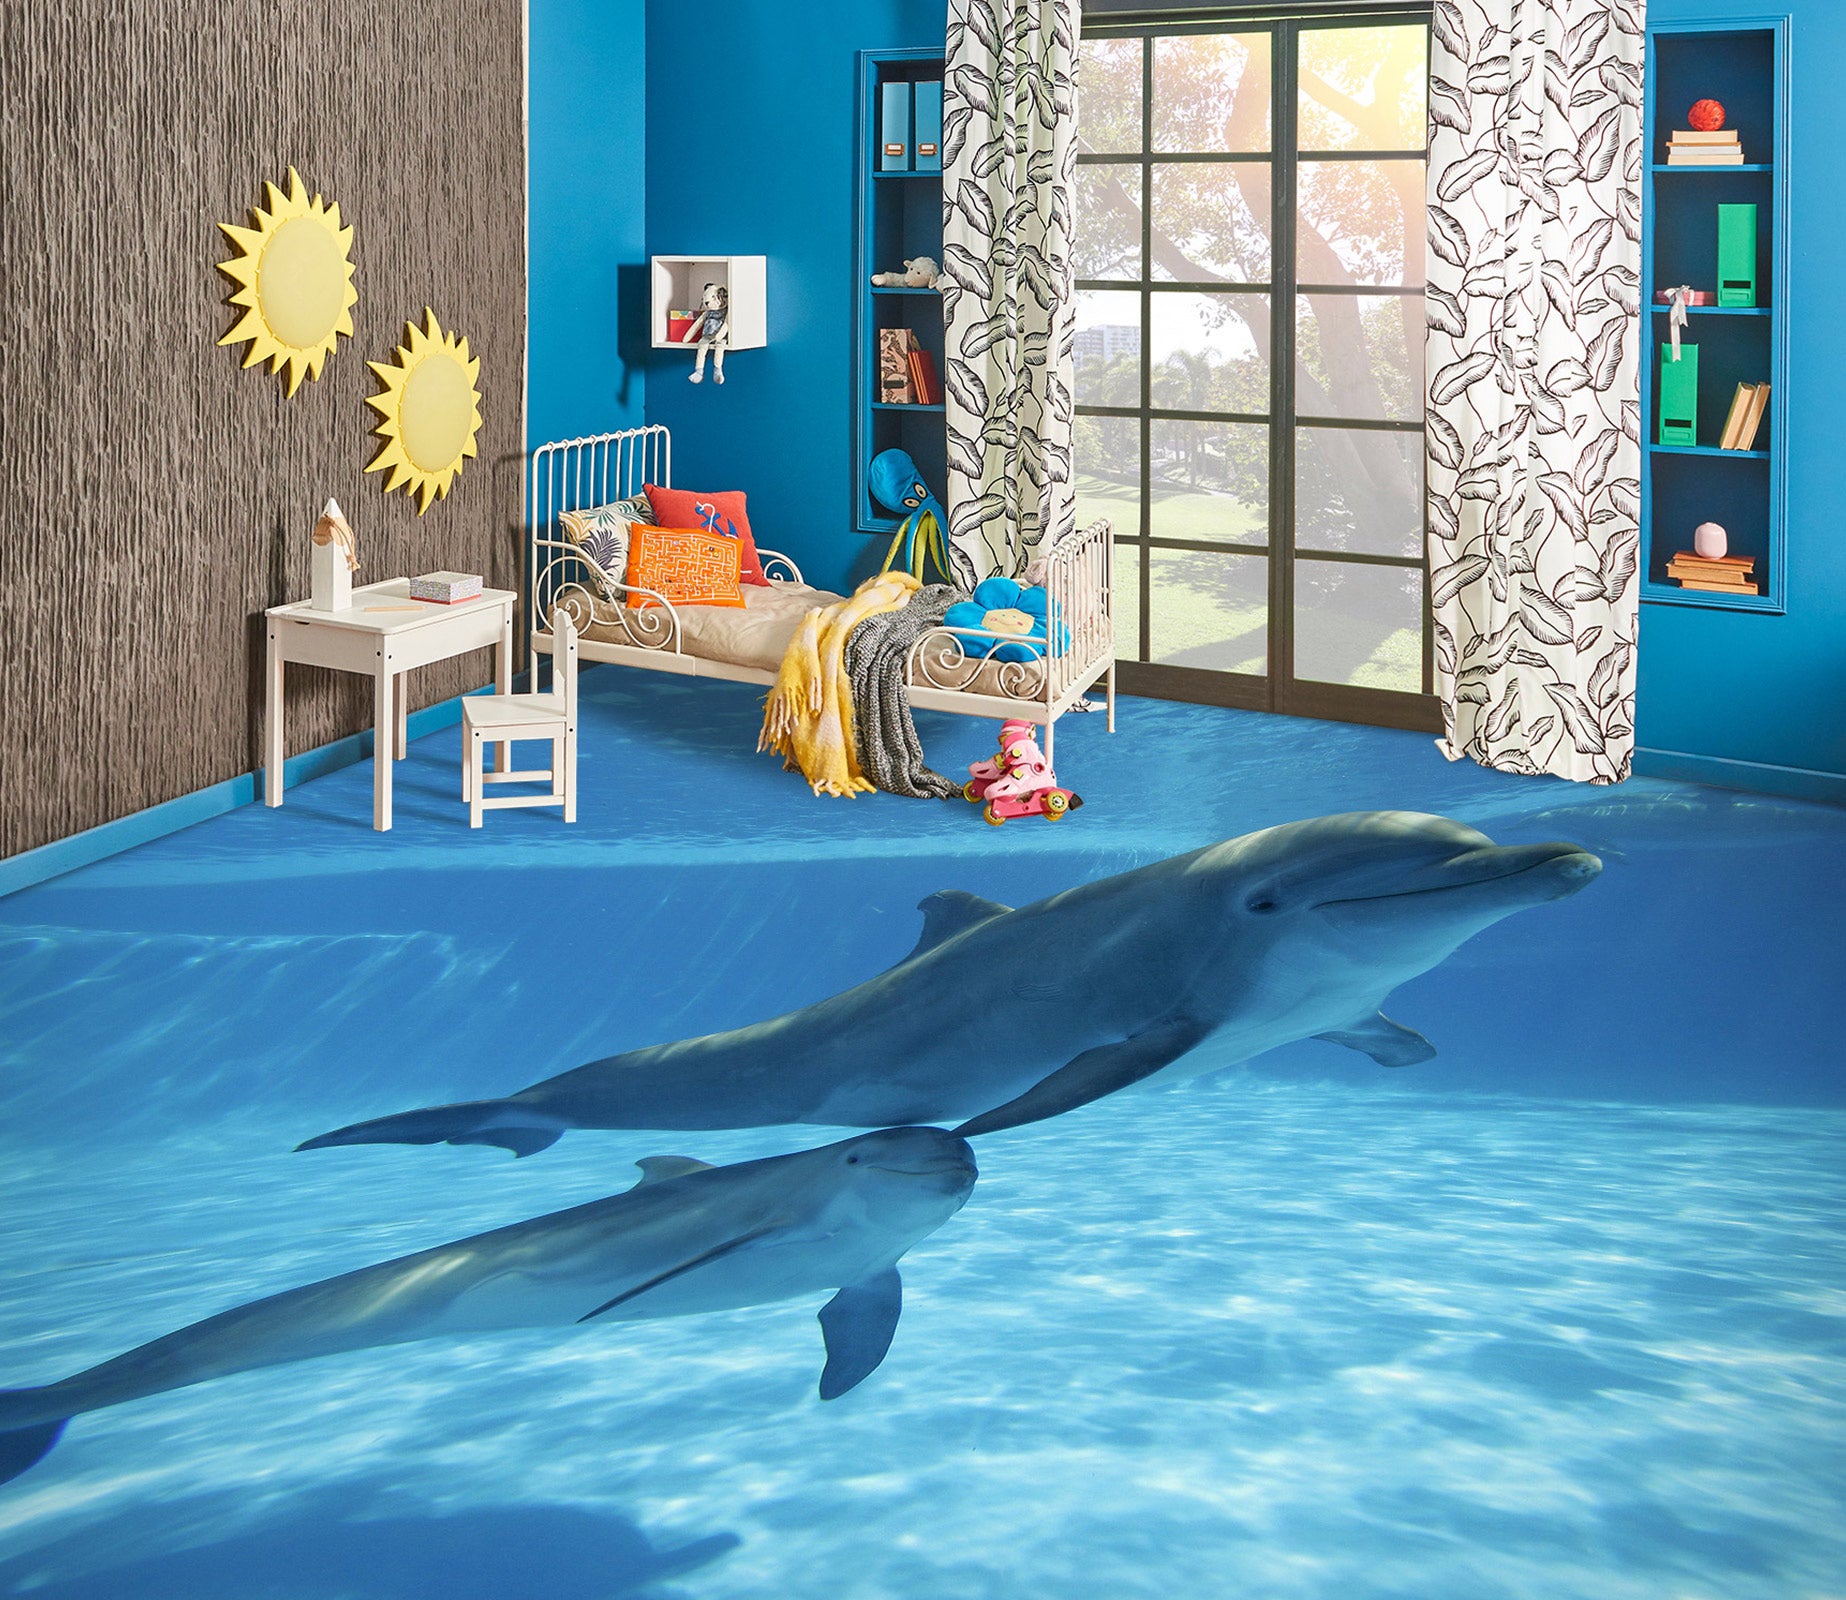 3D Graceful Dolphins 1335 Floor Mural  Wallpaper Murals Self-Adhesive Removable Print Epoxy